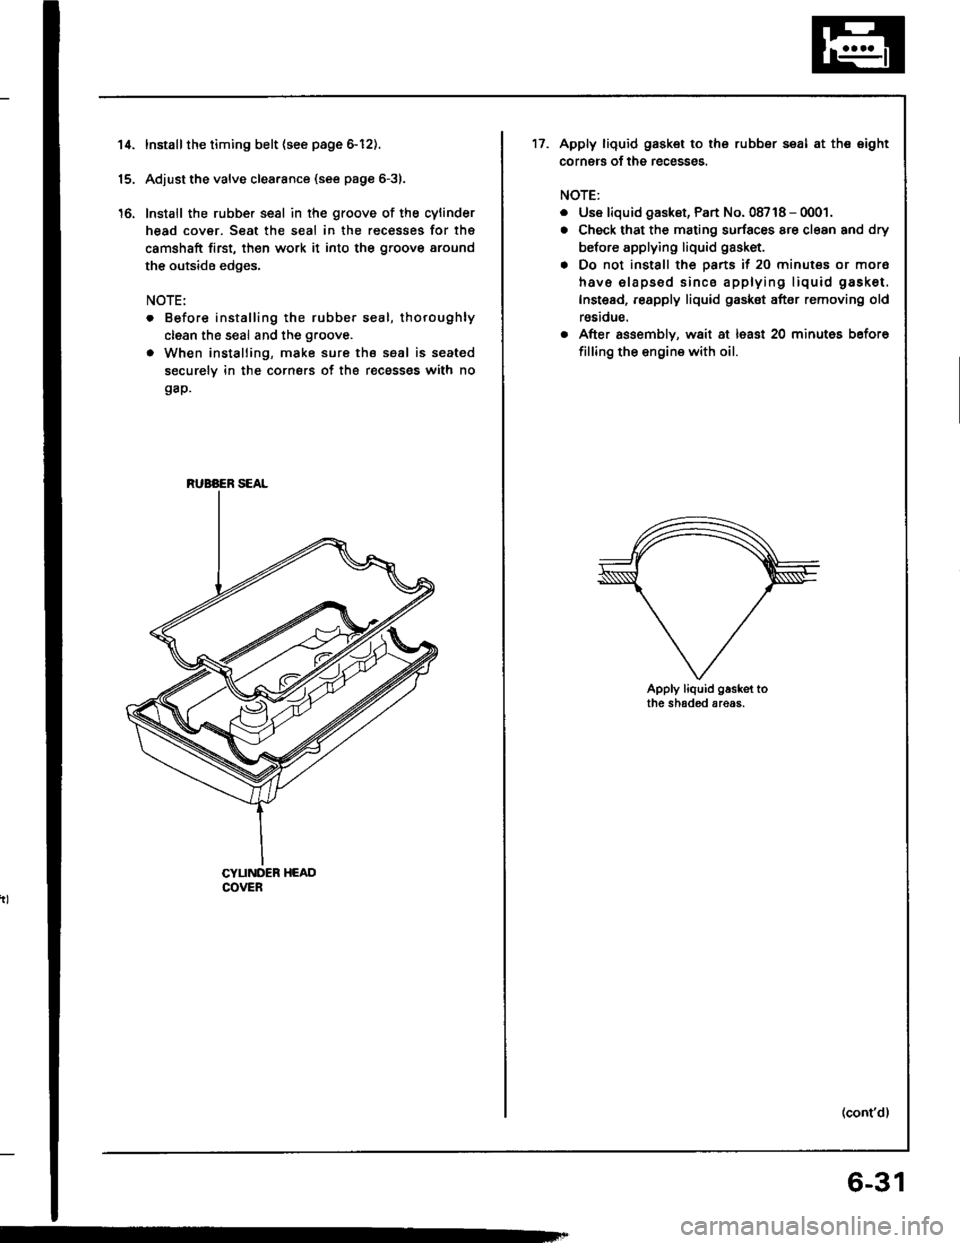 ACURA INTEGRA 1994  Service Repair Manual 14.
16.
Installthe timing belt {see page 6-12).
Adjust the valve clea.ance (see page 6-31.
Install the rubber seal in the groove of the cylinder
head cover. Seat the seal in the recesses for thg
camsh